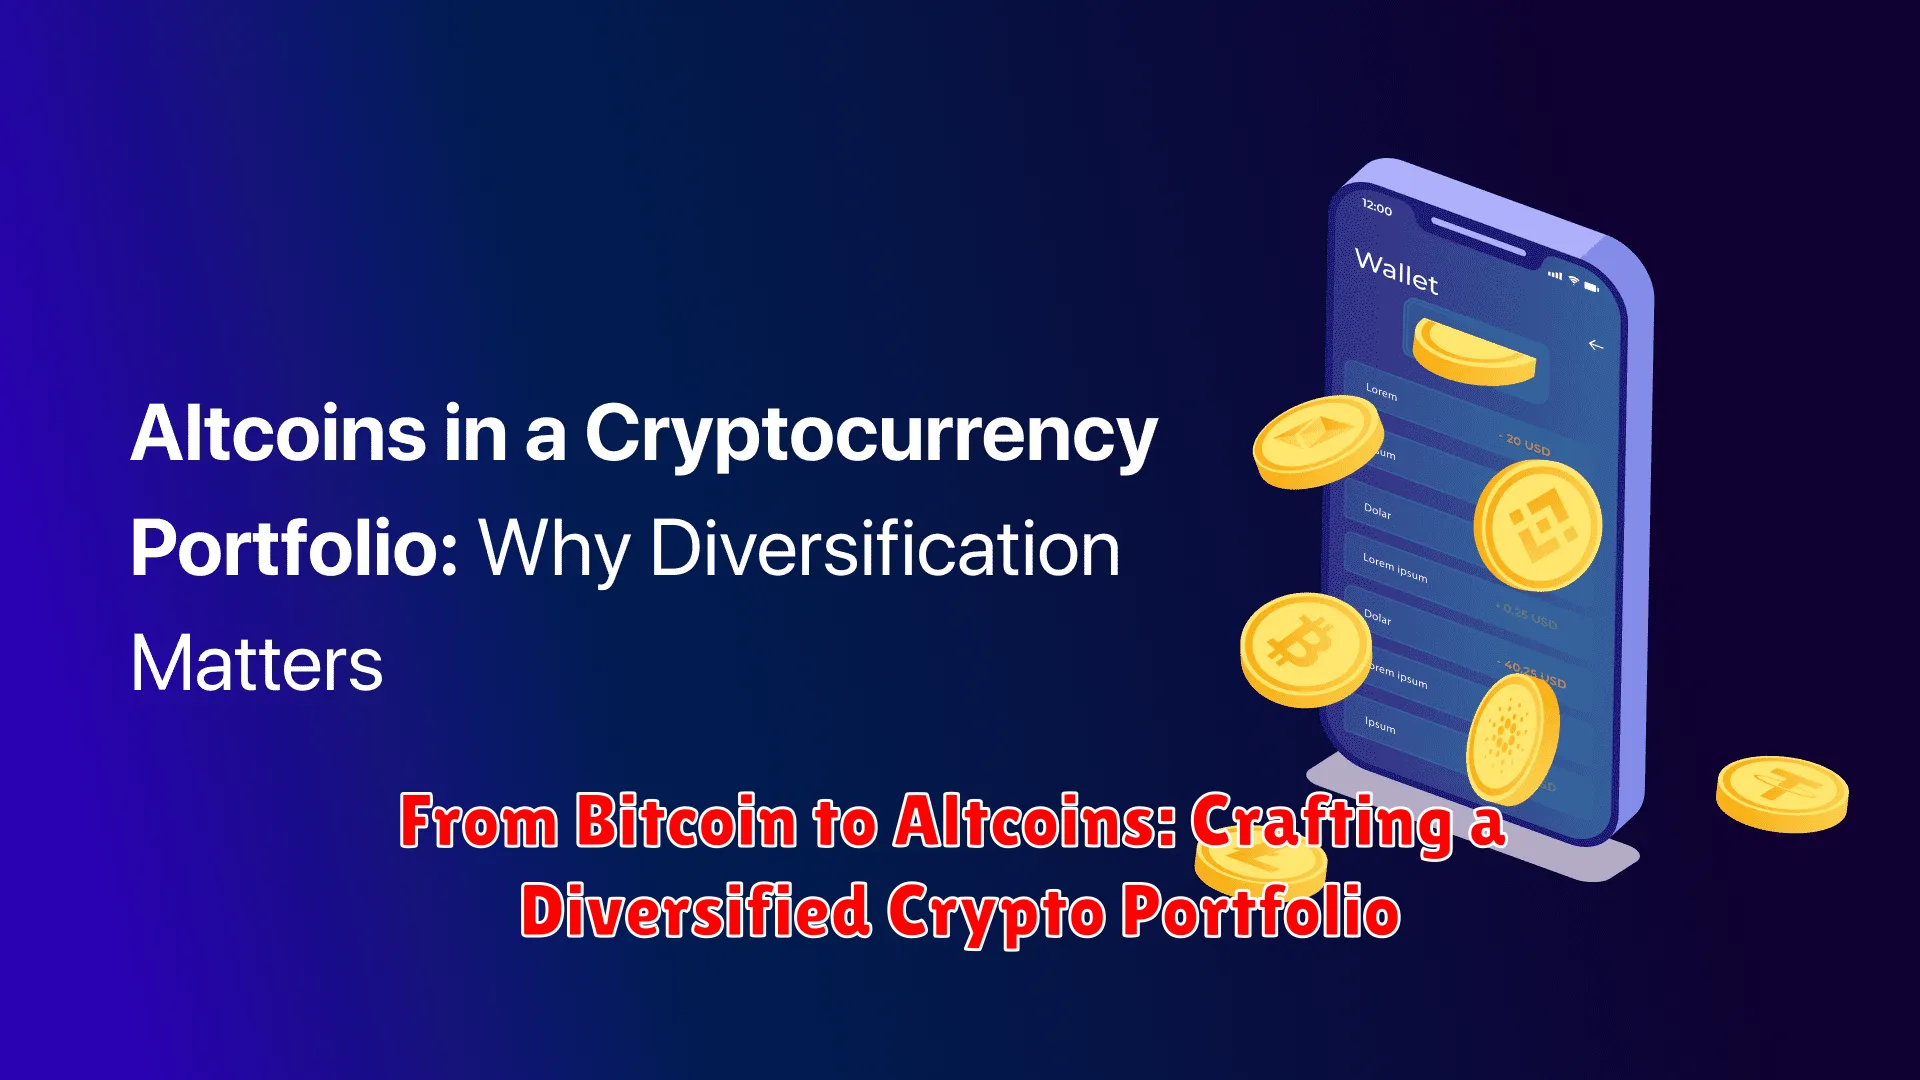 From Bitcoin to Altcoins: Crafting a Diversified Crypto Portfolio